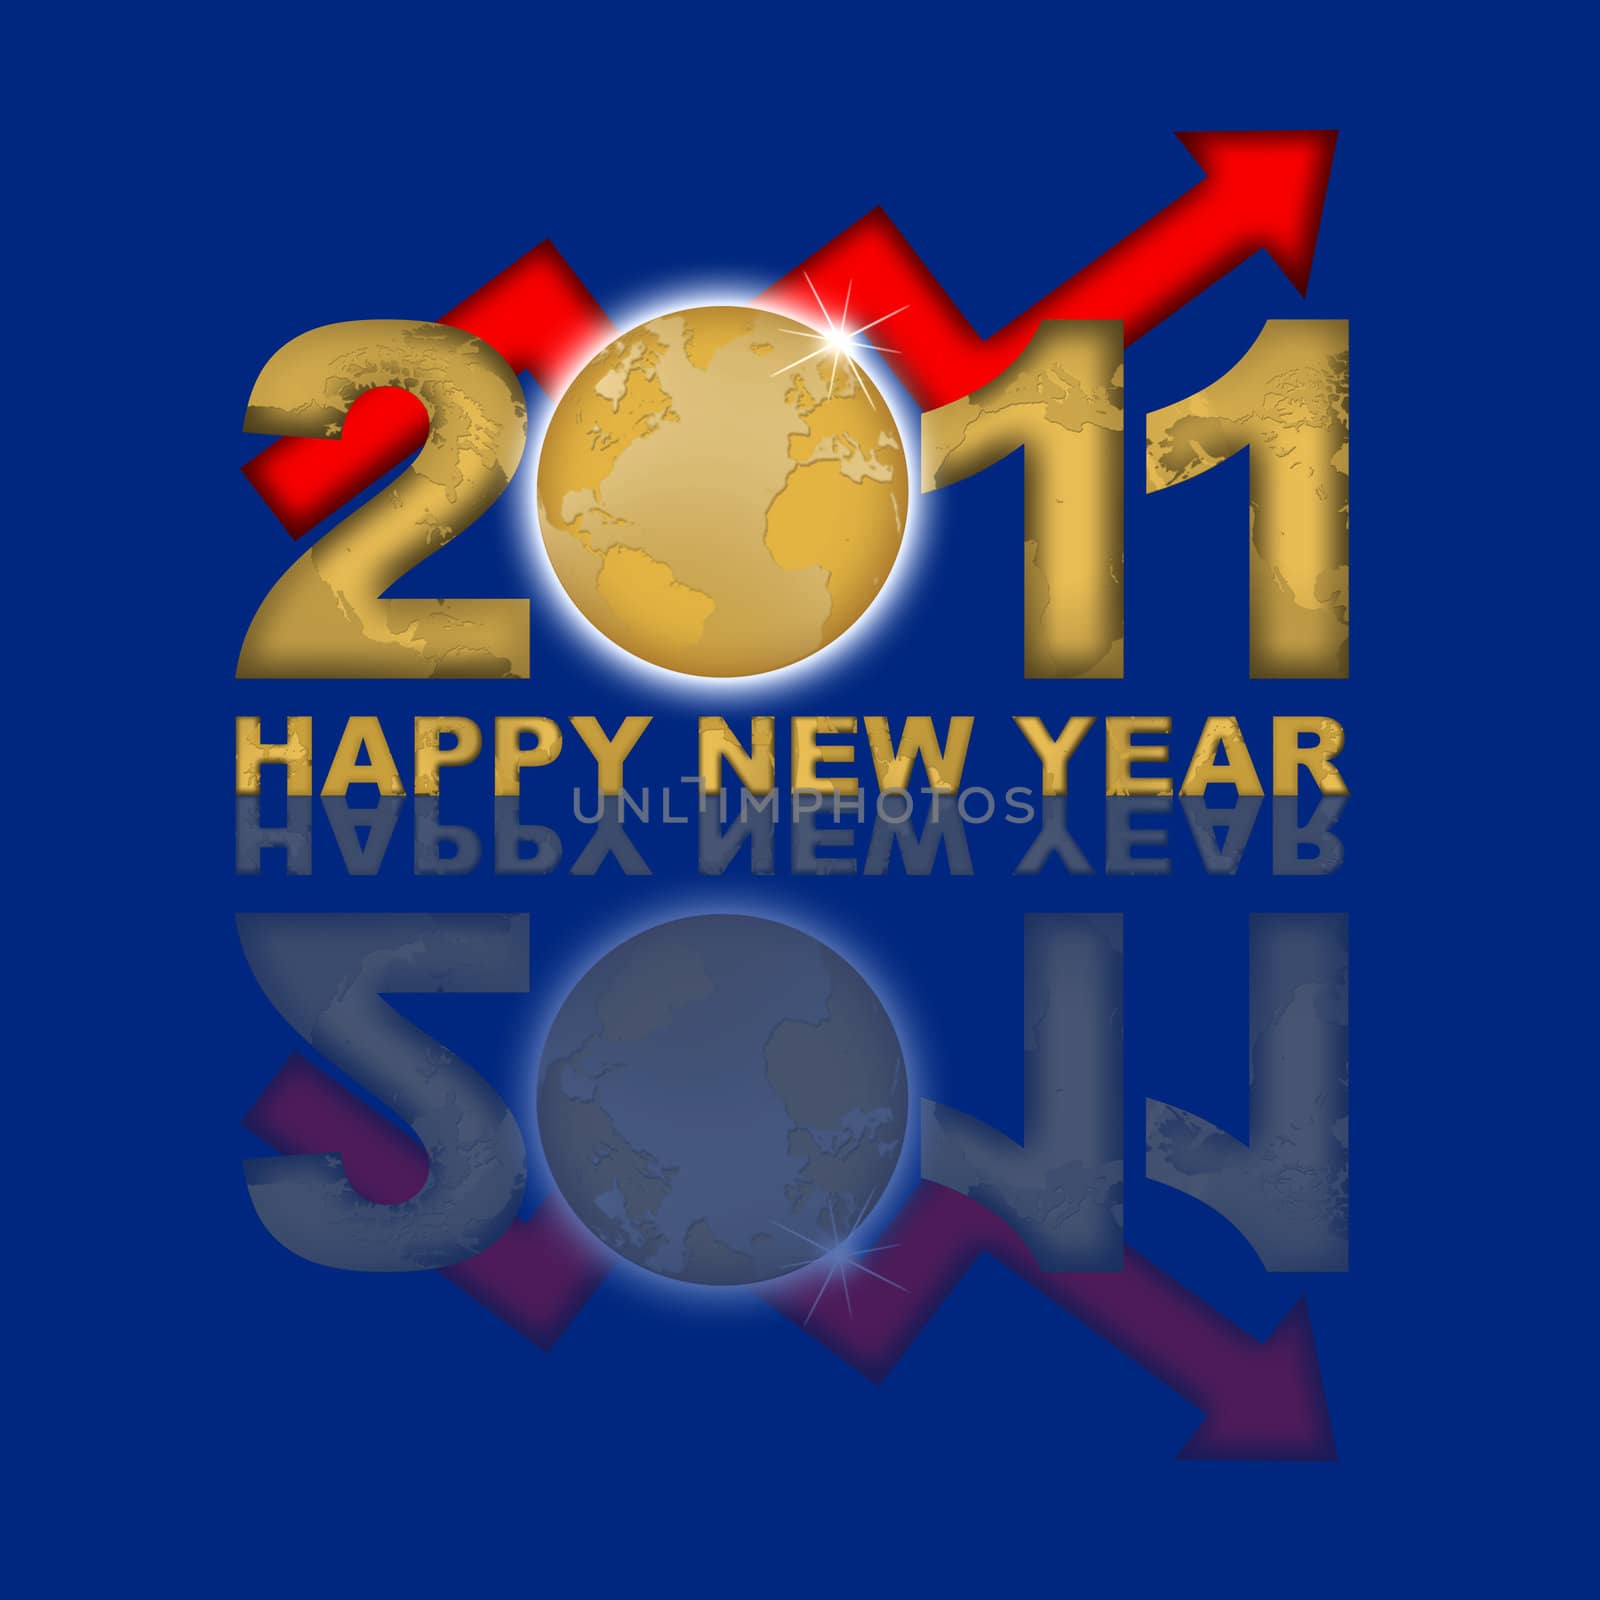 Happy New Year 2011 Financial Gold Market by Davidgn